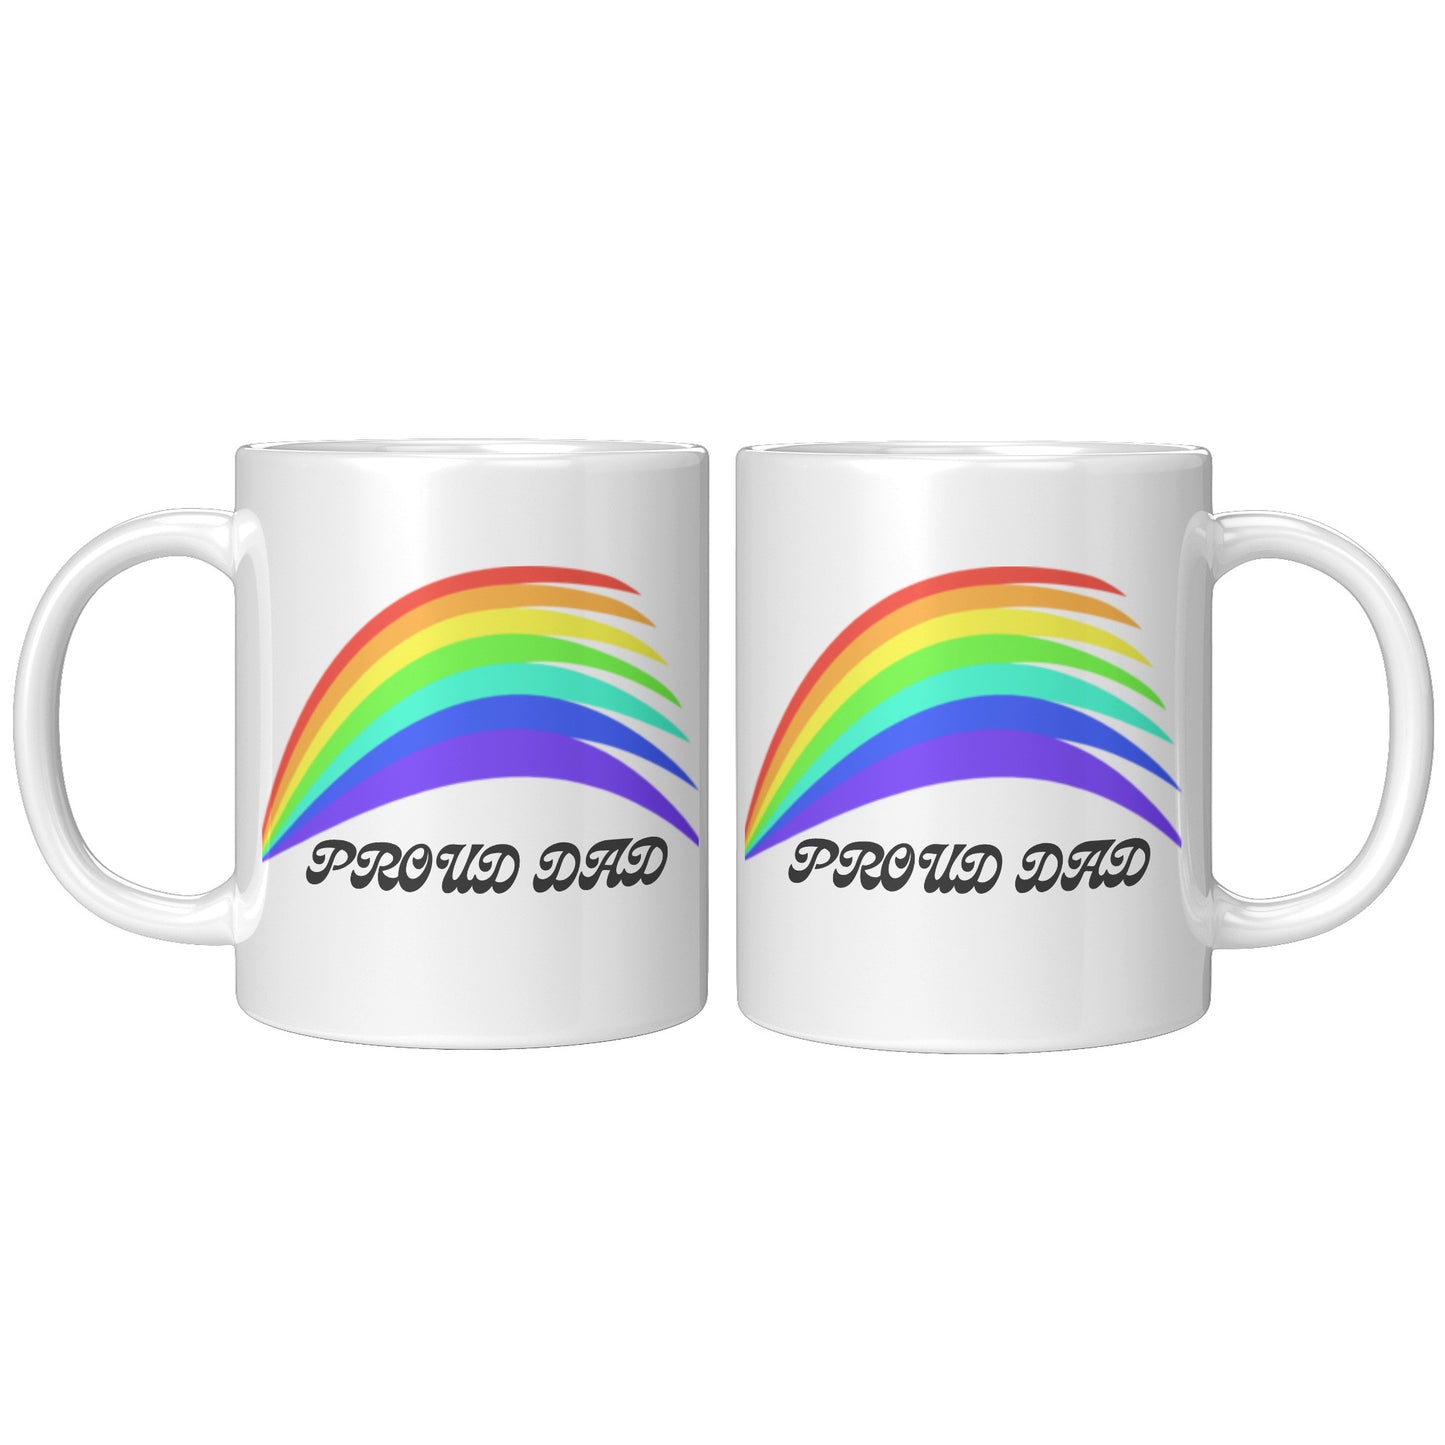 LGBTQ+ Pride Rainbow Mug For Dad To Support Your Loved Ones, White With Colourful Design